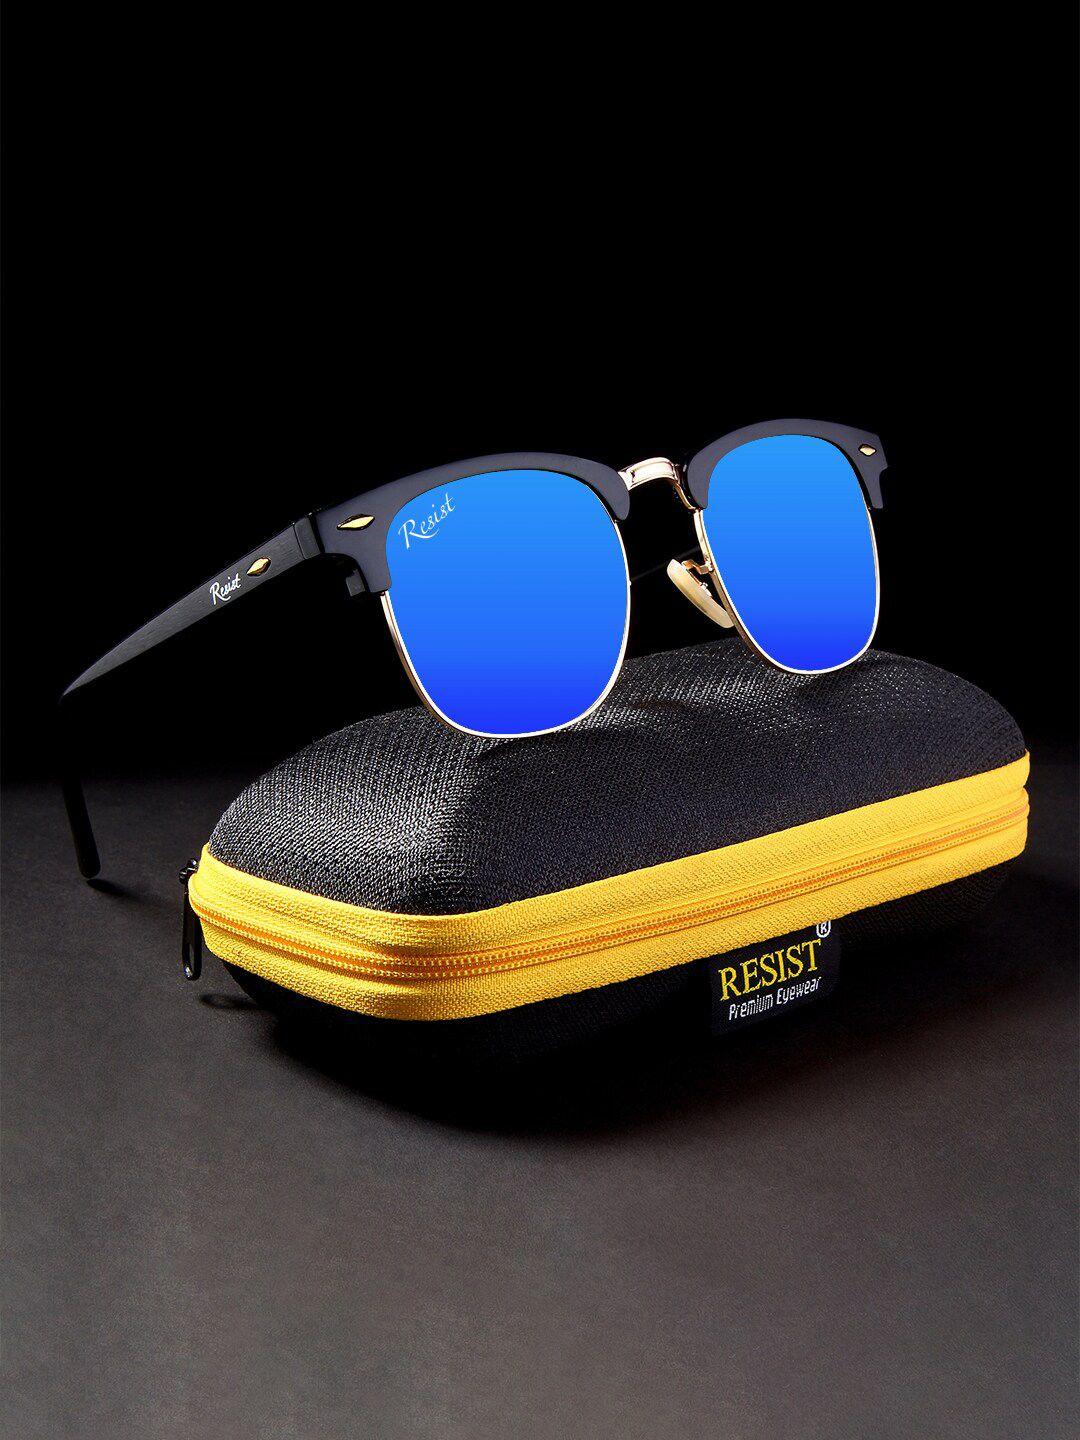 resist eyewear unisex blue lens & gold-toned browline sunglasses with uv protected lens